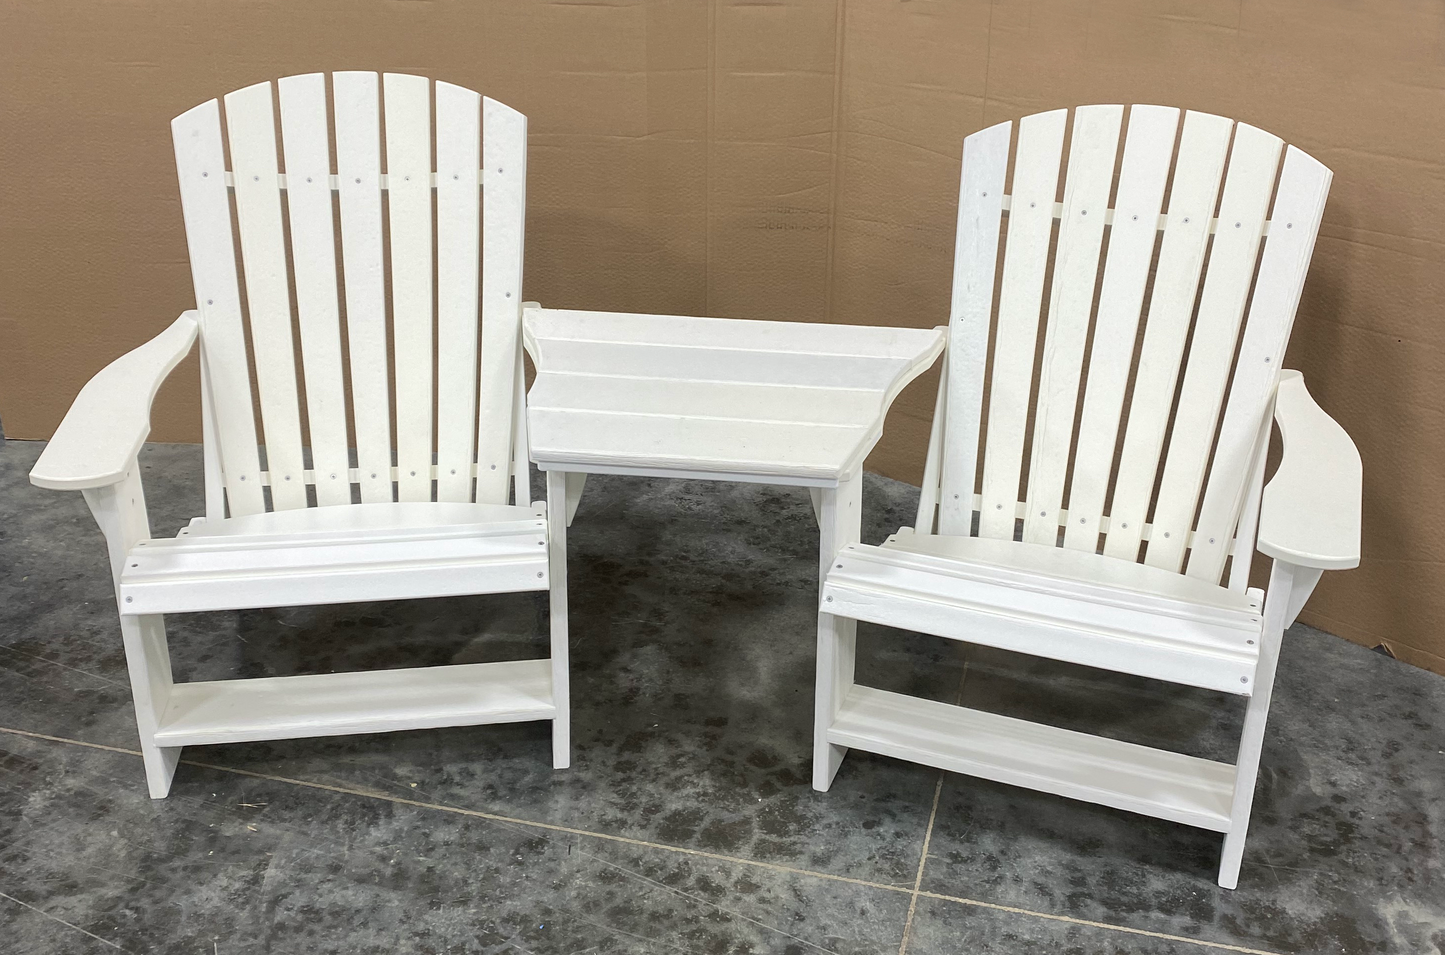 Wildridge Outdoor Recycled Plastic Tete a Tete Connecting Table (CHAIRS SOLD SEPARATELY) - LEAD TIME TO SHIP 3 WEEKS